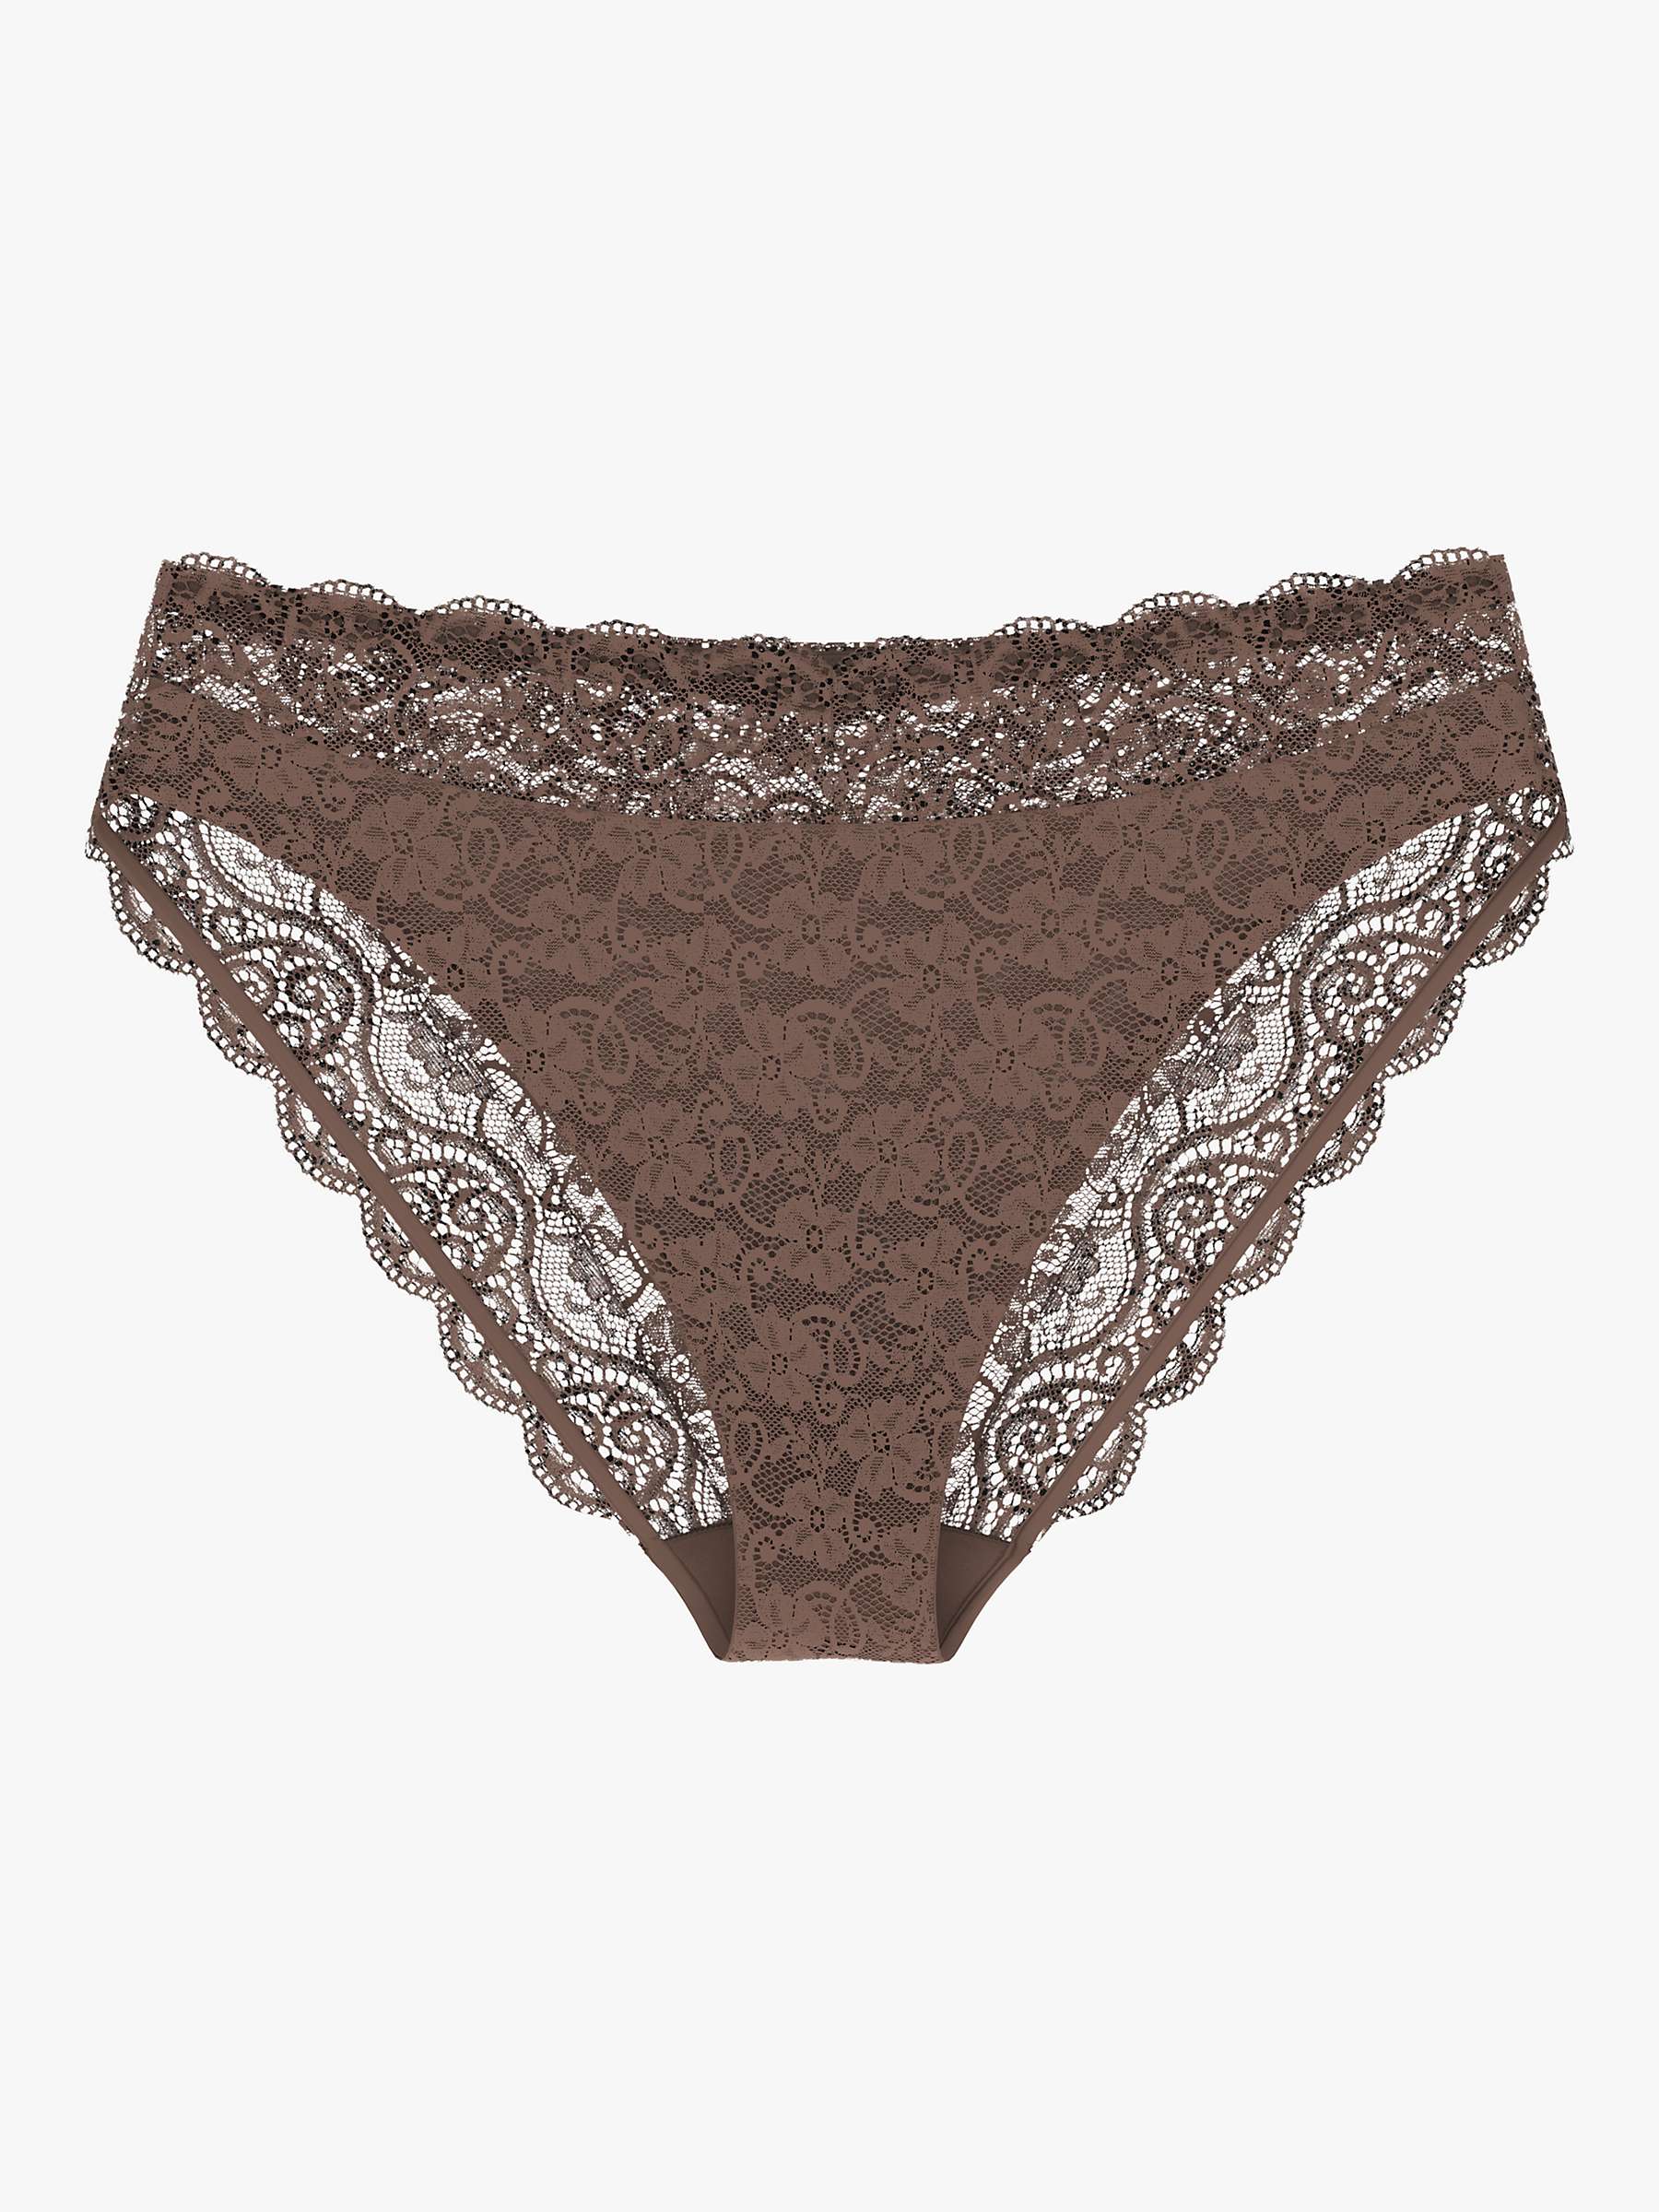 Buy Triumph Amourette 300 Tai Knickers Online at johnlewis.com